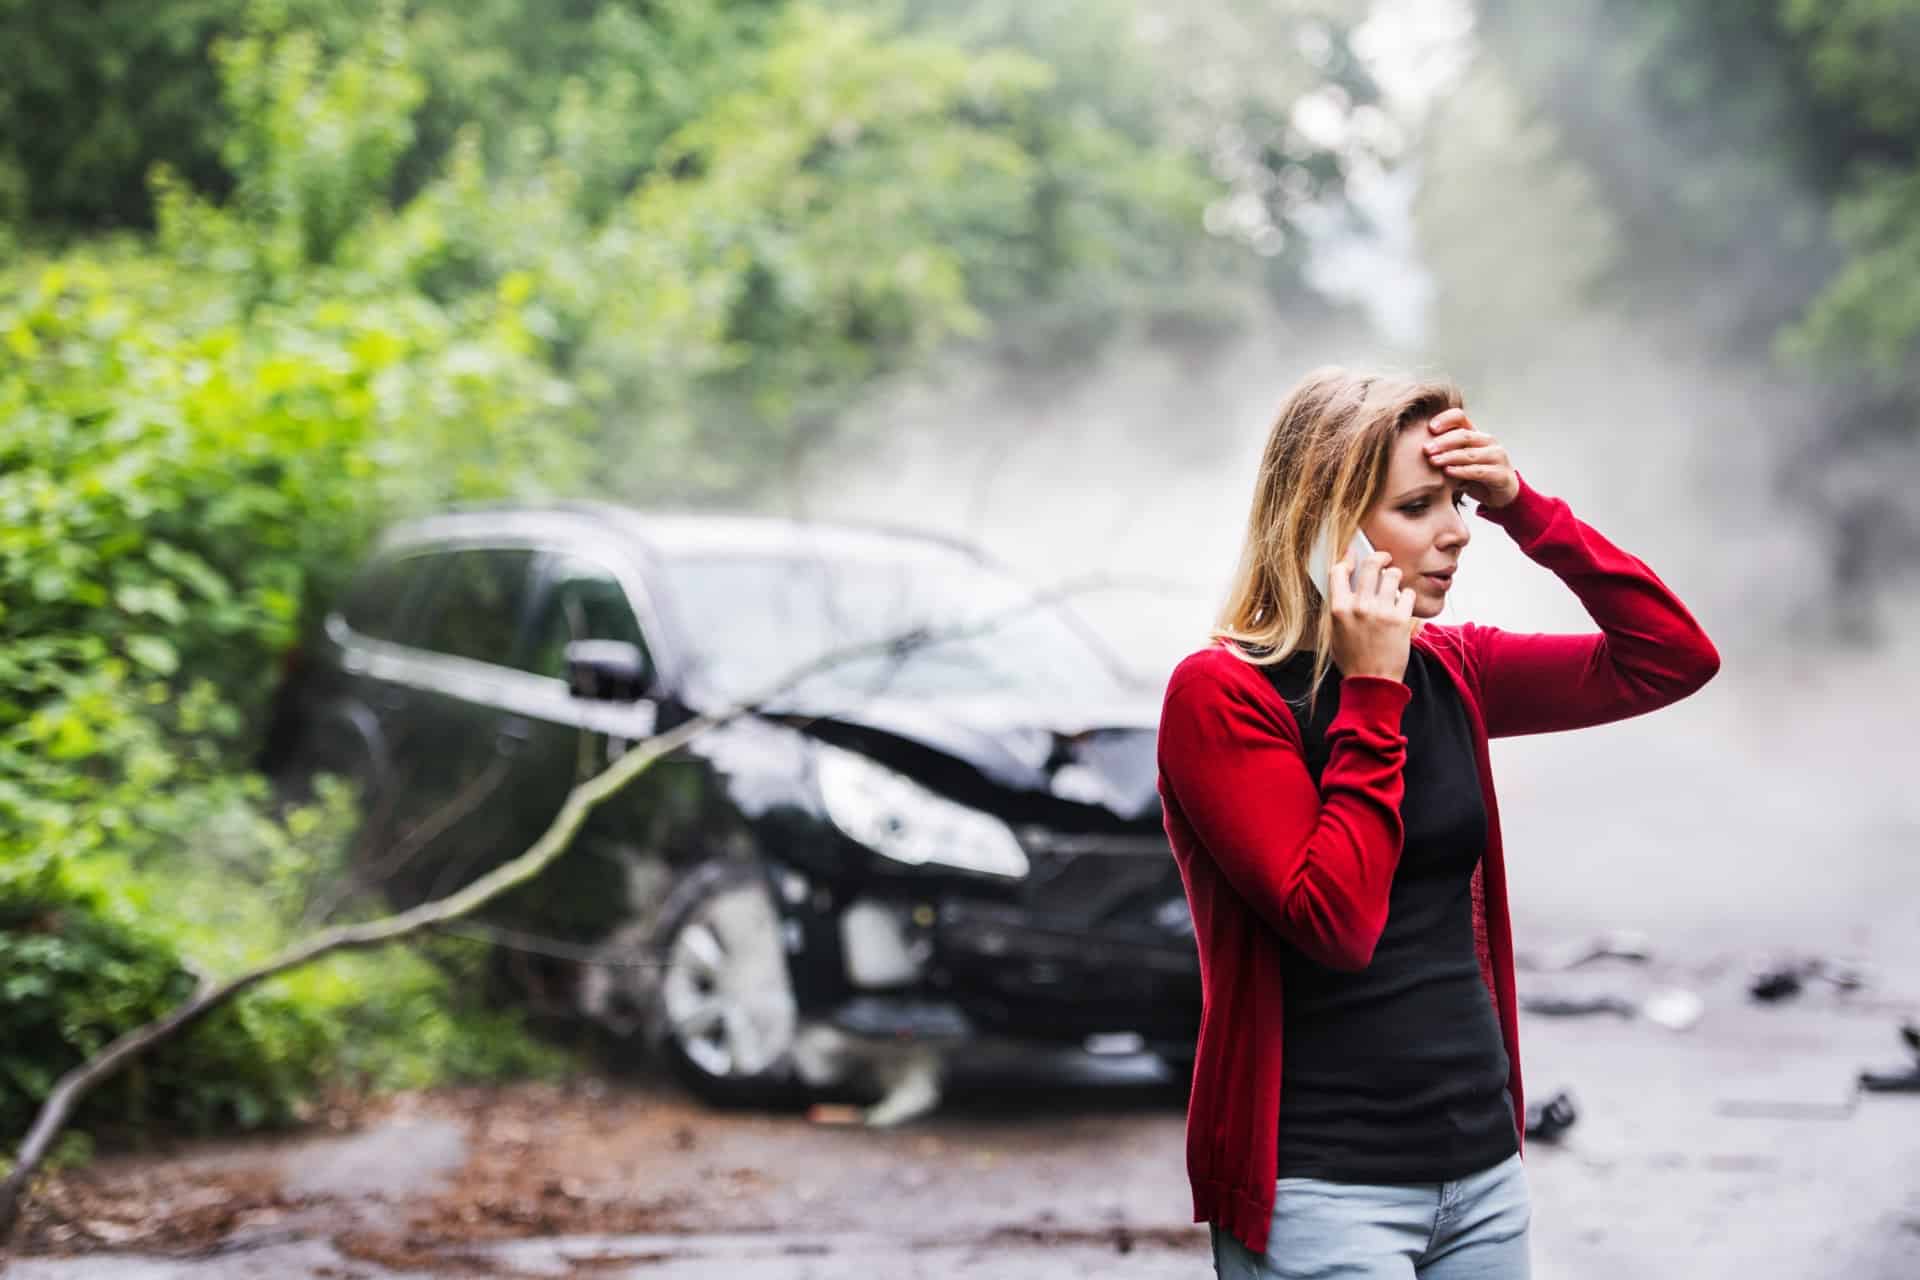 Woman with Smartphone and a Car Crashed in the Background